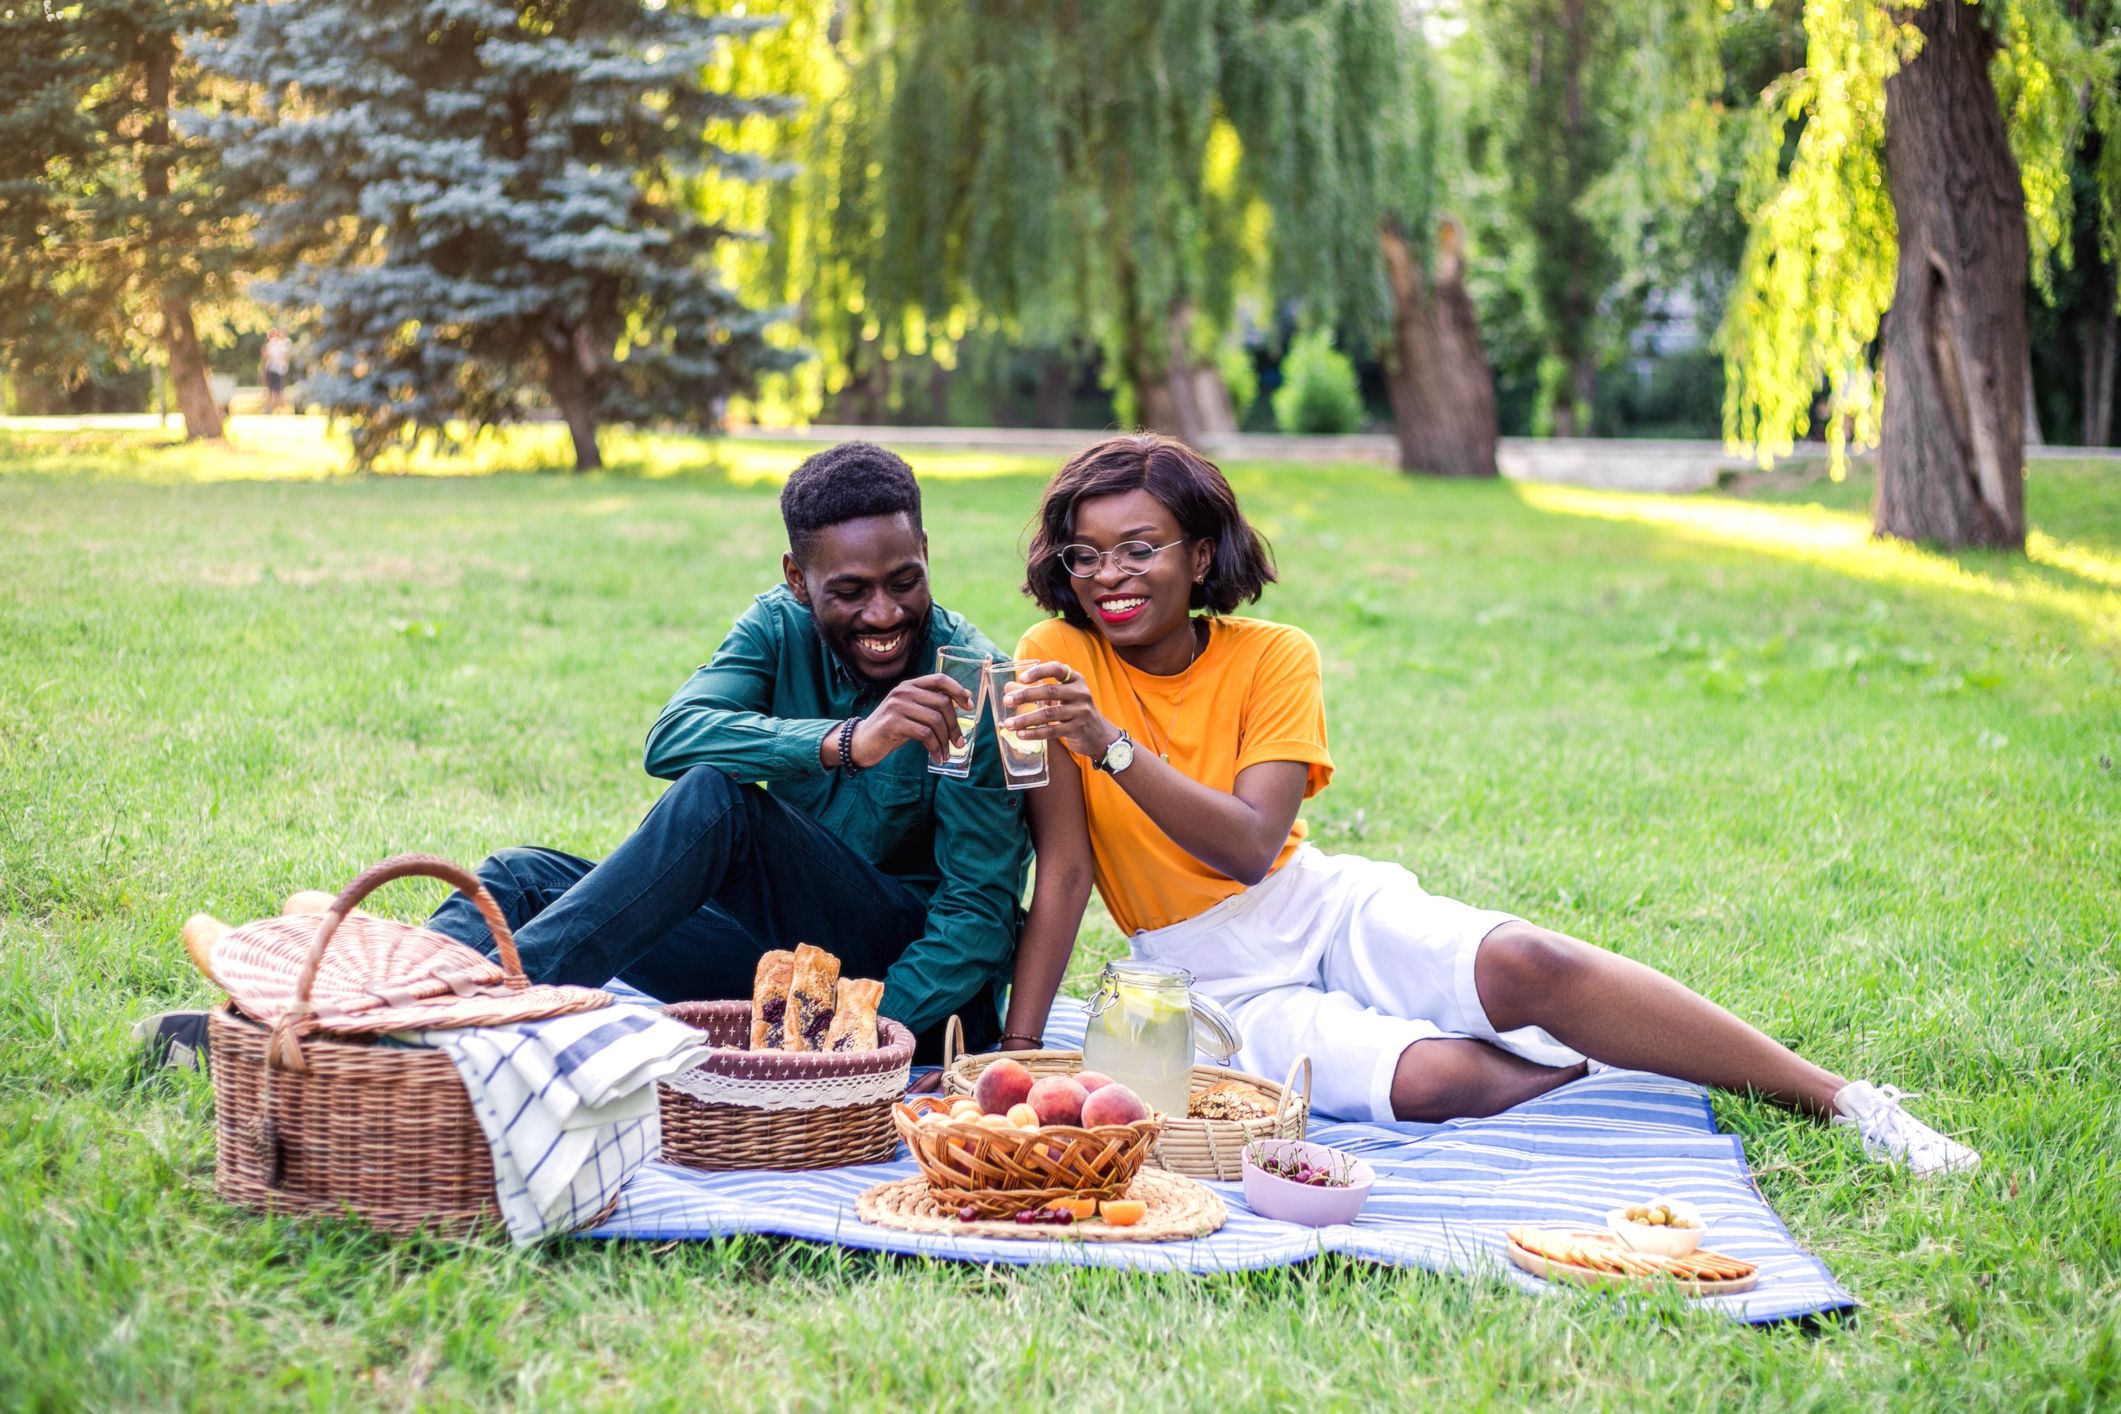 https://hips.hearstapps.com/hmg-prod/images/young-black-couple-on-picnic-in-the-park-royalty-free-image-1647881312.jpg